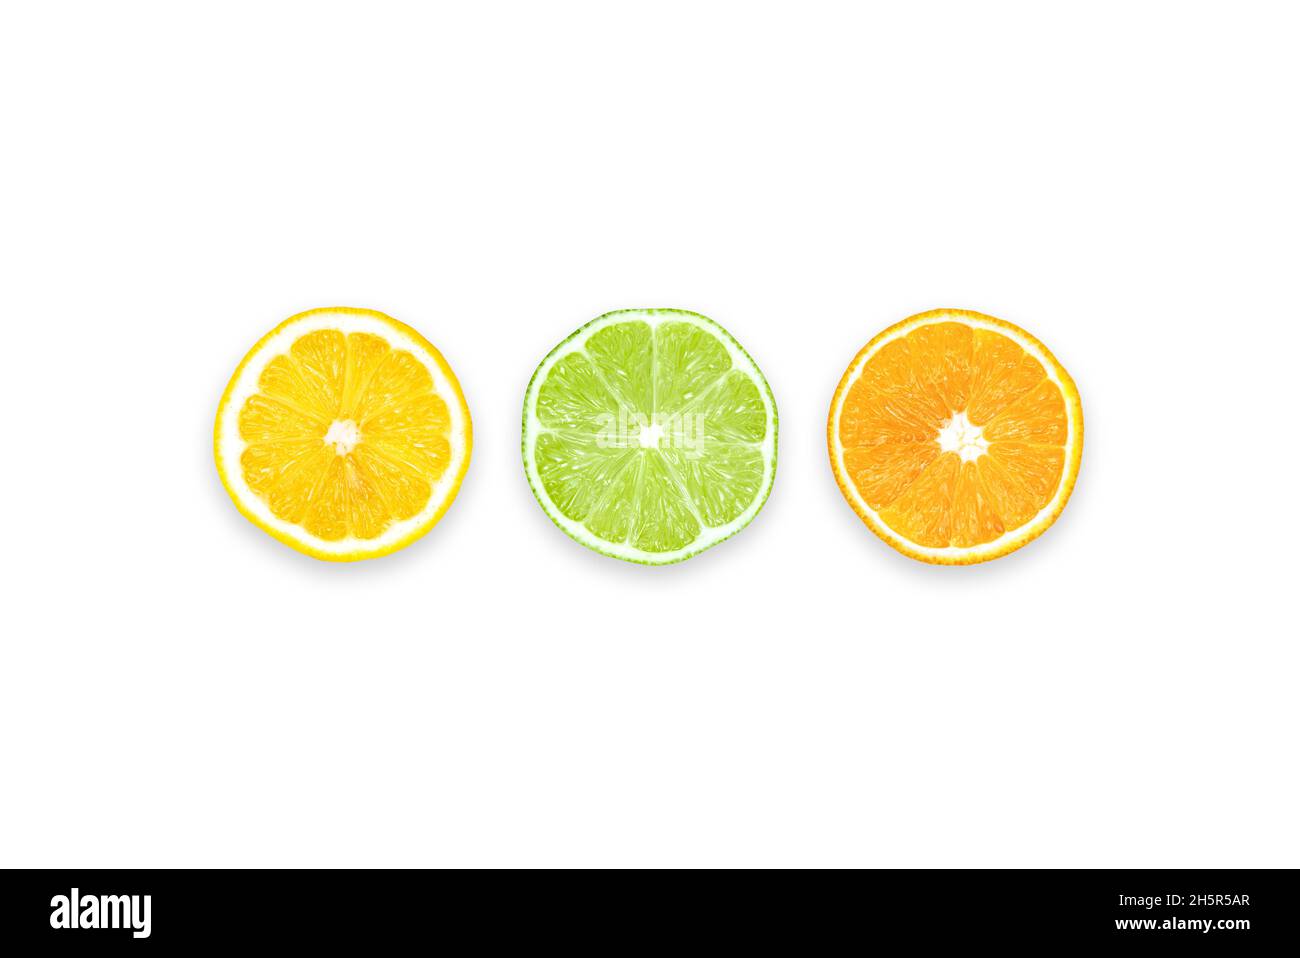 Lemon, Lime and Orange: Three slices of different citrus fruits. Table top view, flat lay, copy space. Stock Photo